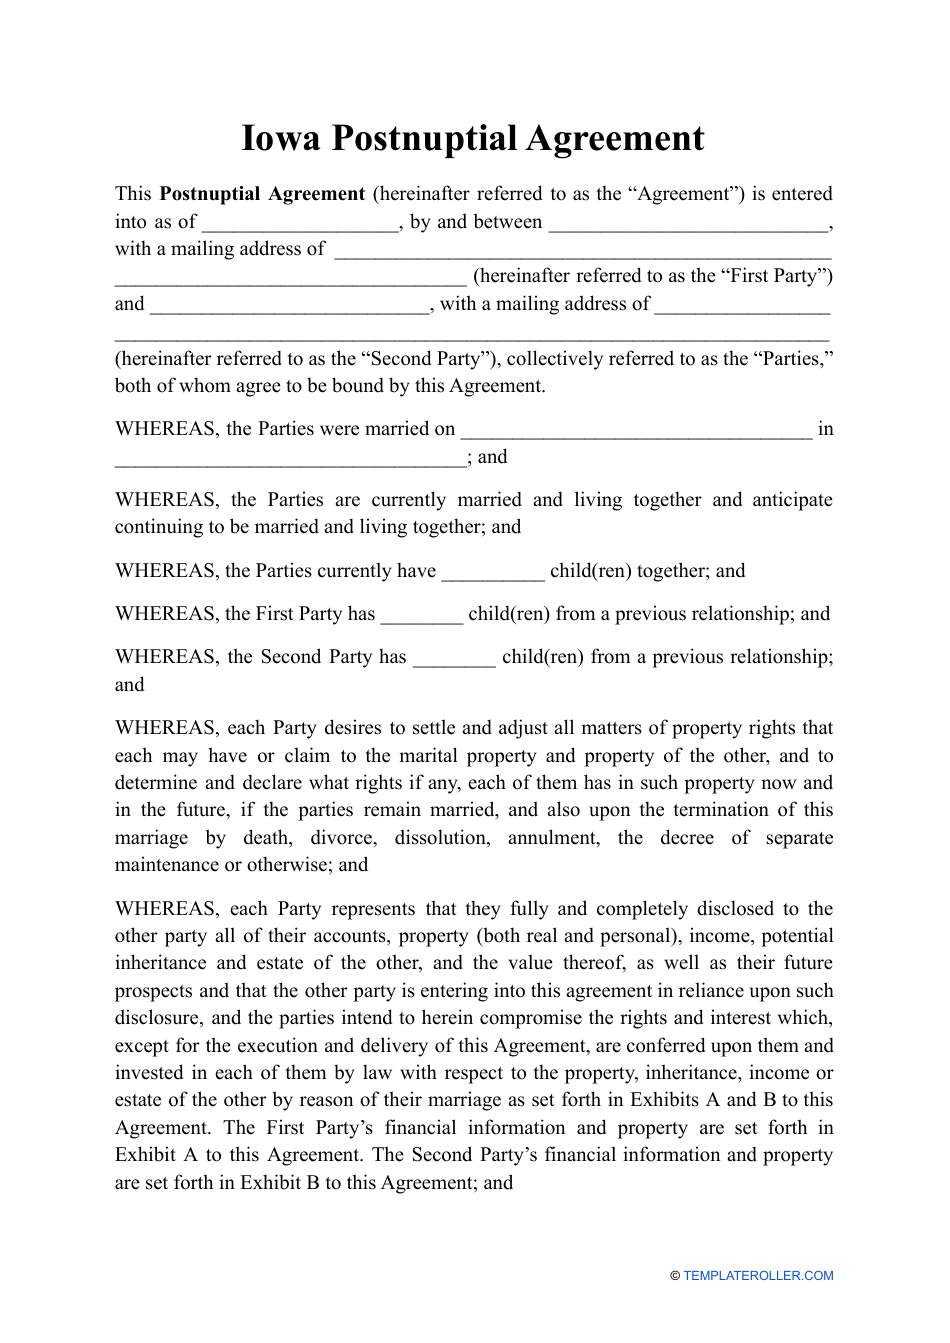 Postnuptial Agreement Template - Iowa, Page 1